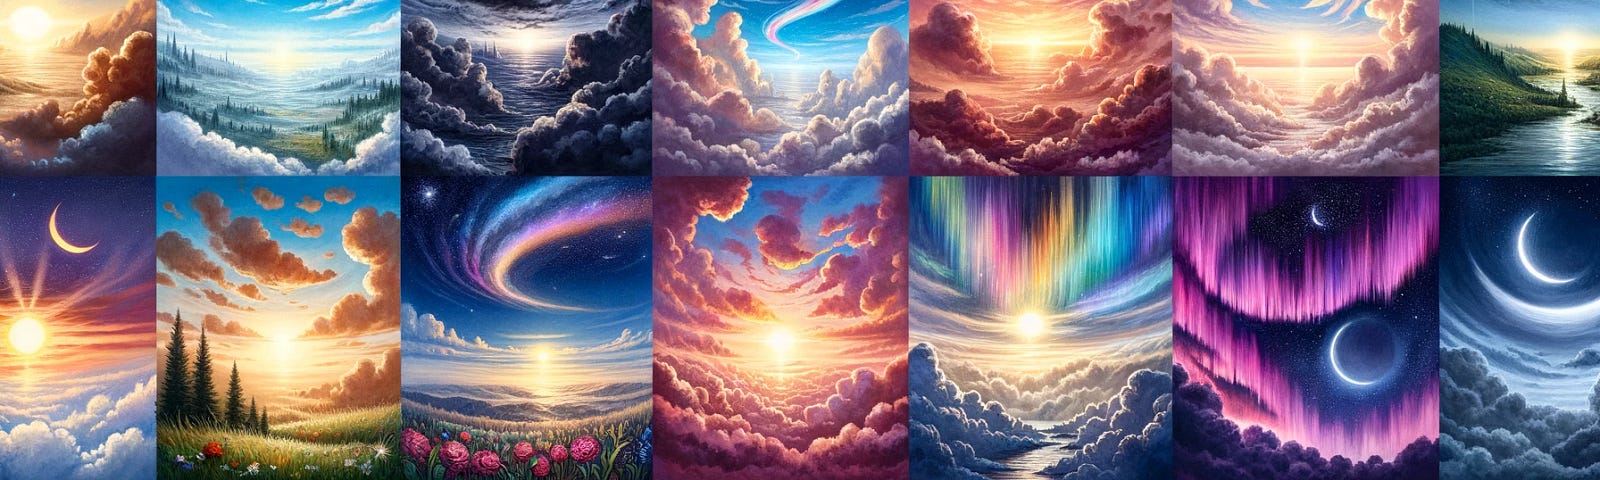 A vivid and colourful image showcasing various sky scenes from morning to night, including sunrise, sunset, storm clouds, starry night, auroras, meteor showers, and an eclipse.